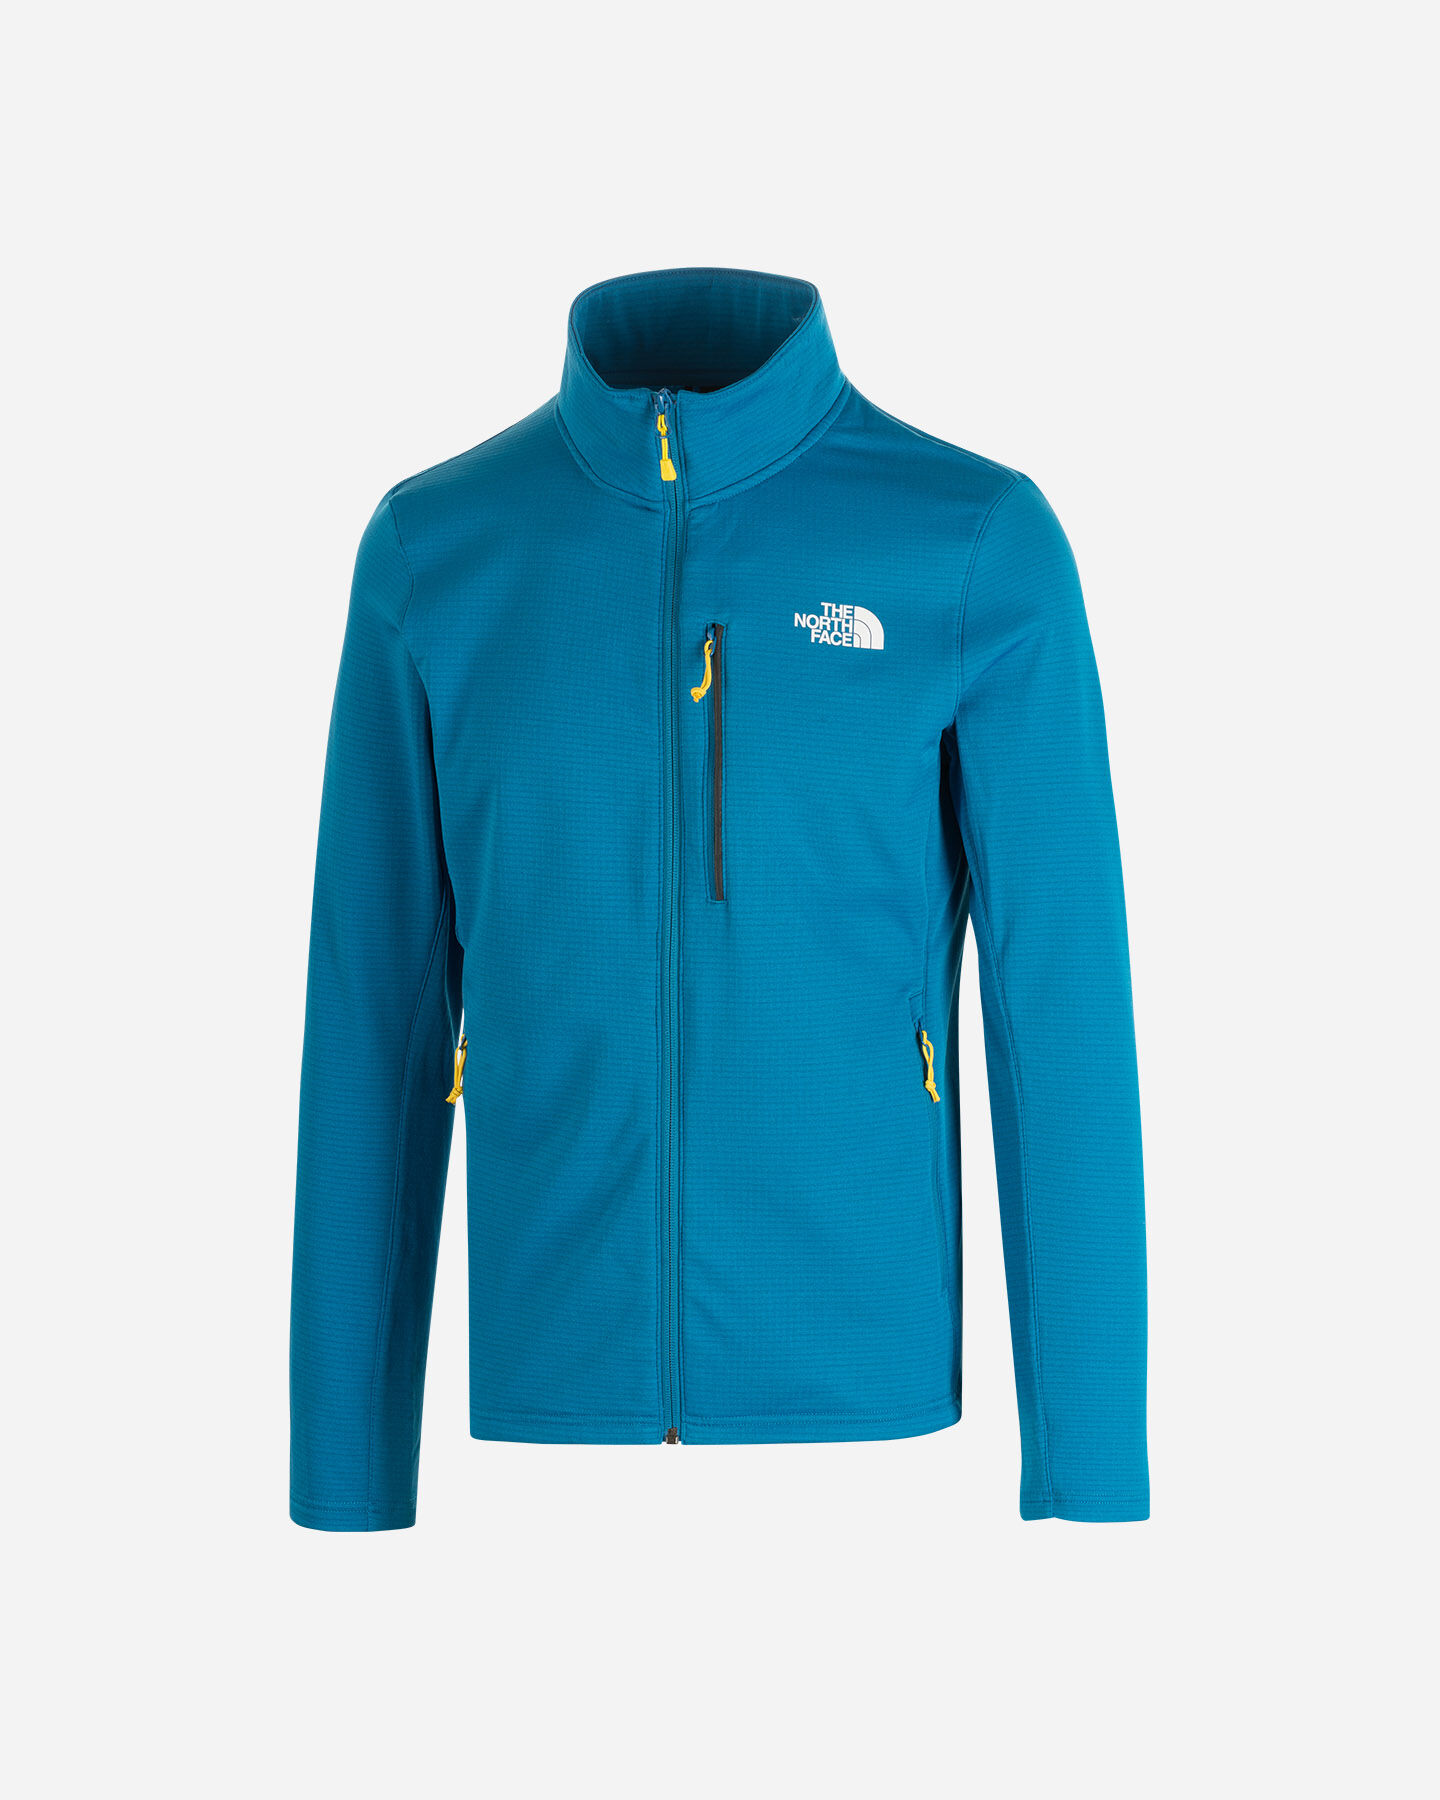  Pile THE NORTH FACE ODLES FLEECE M S5430728|5F0|S scatto 0